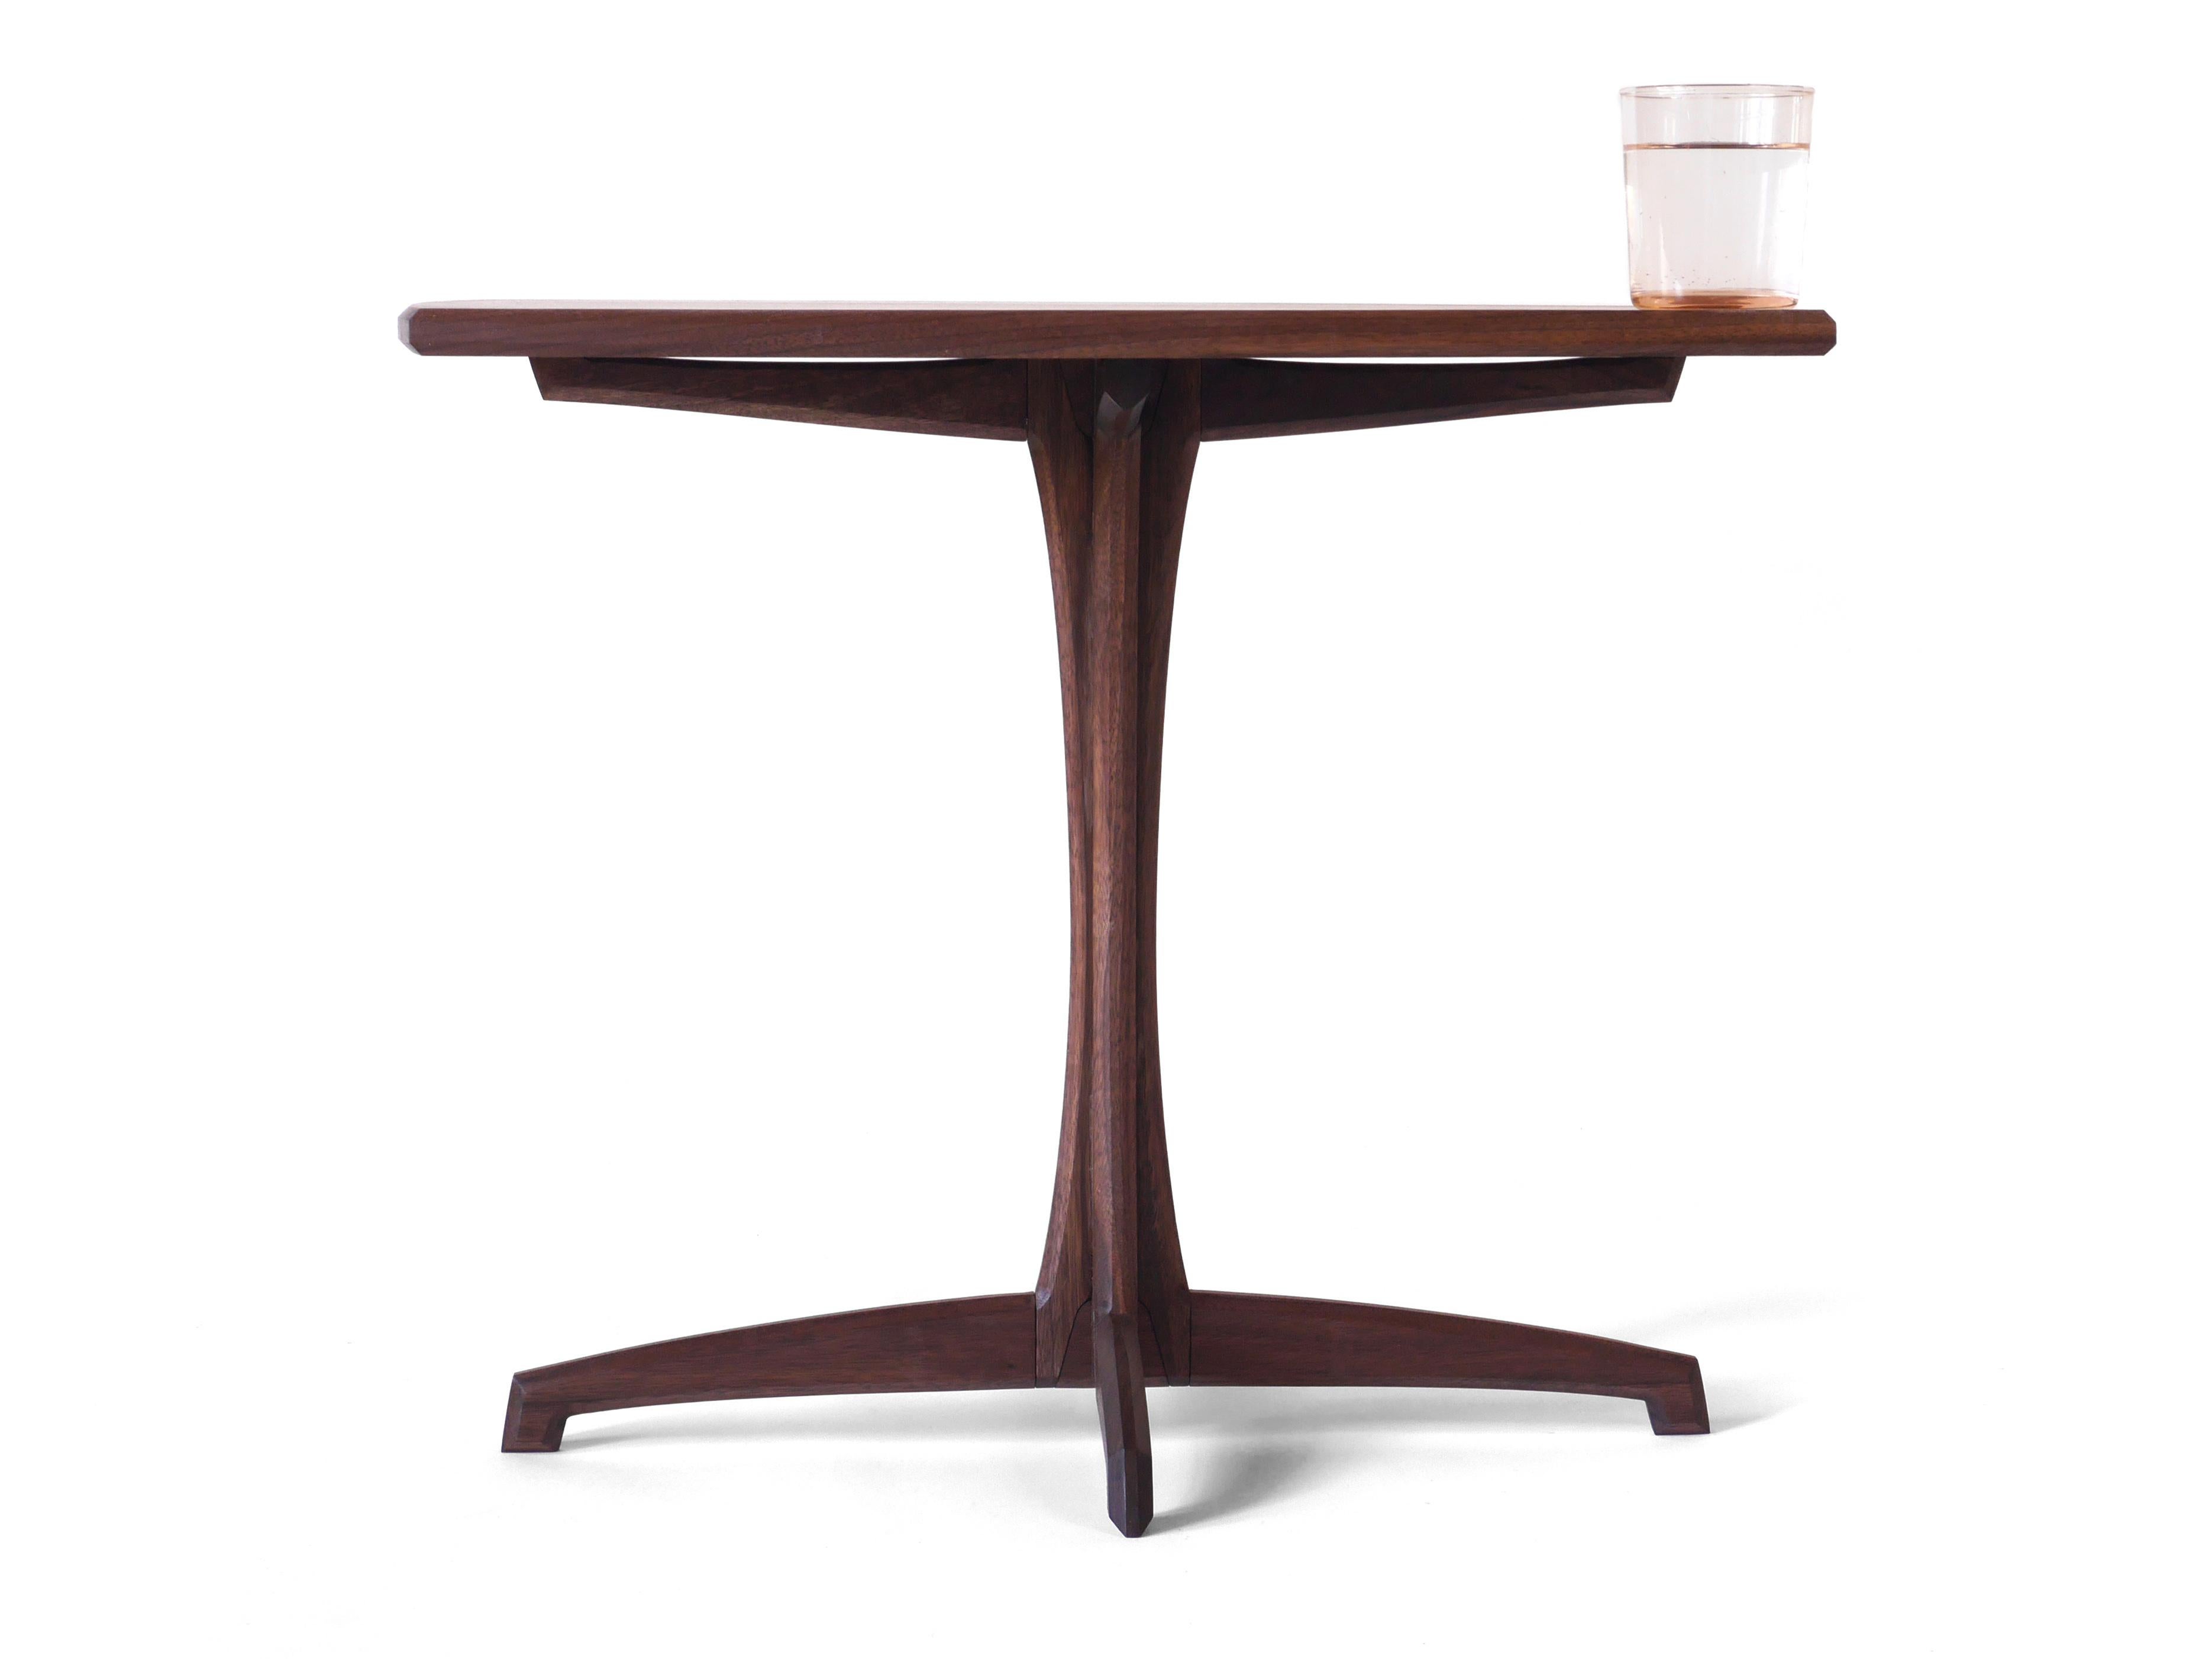 This elegant Plume Side Table is made out of solid black walnut hardwood and has a detail rich grace highlighted by its simplicity. Each piece is built to order one at a time by master craftspeople in our shop in Albuquerque, NM, and assembled to